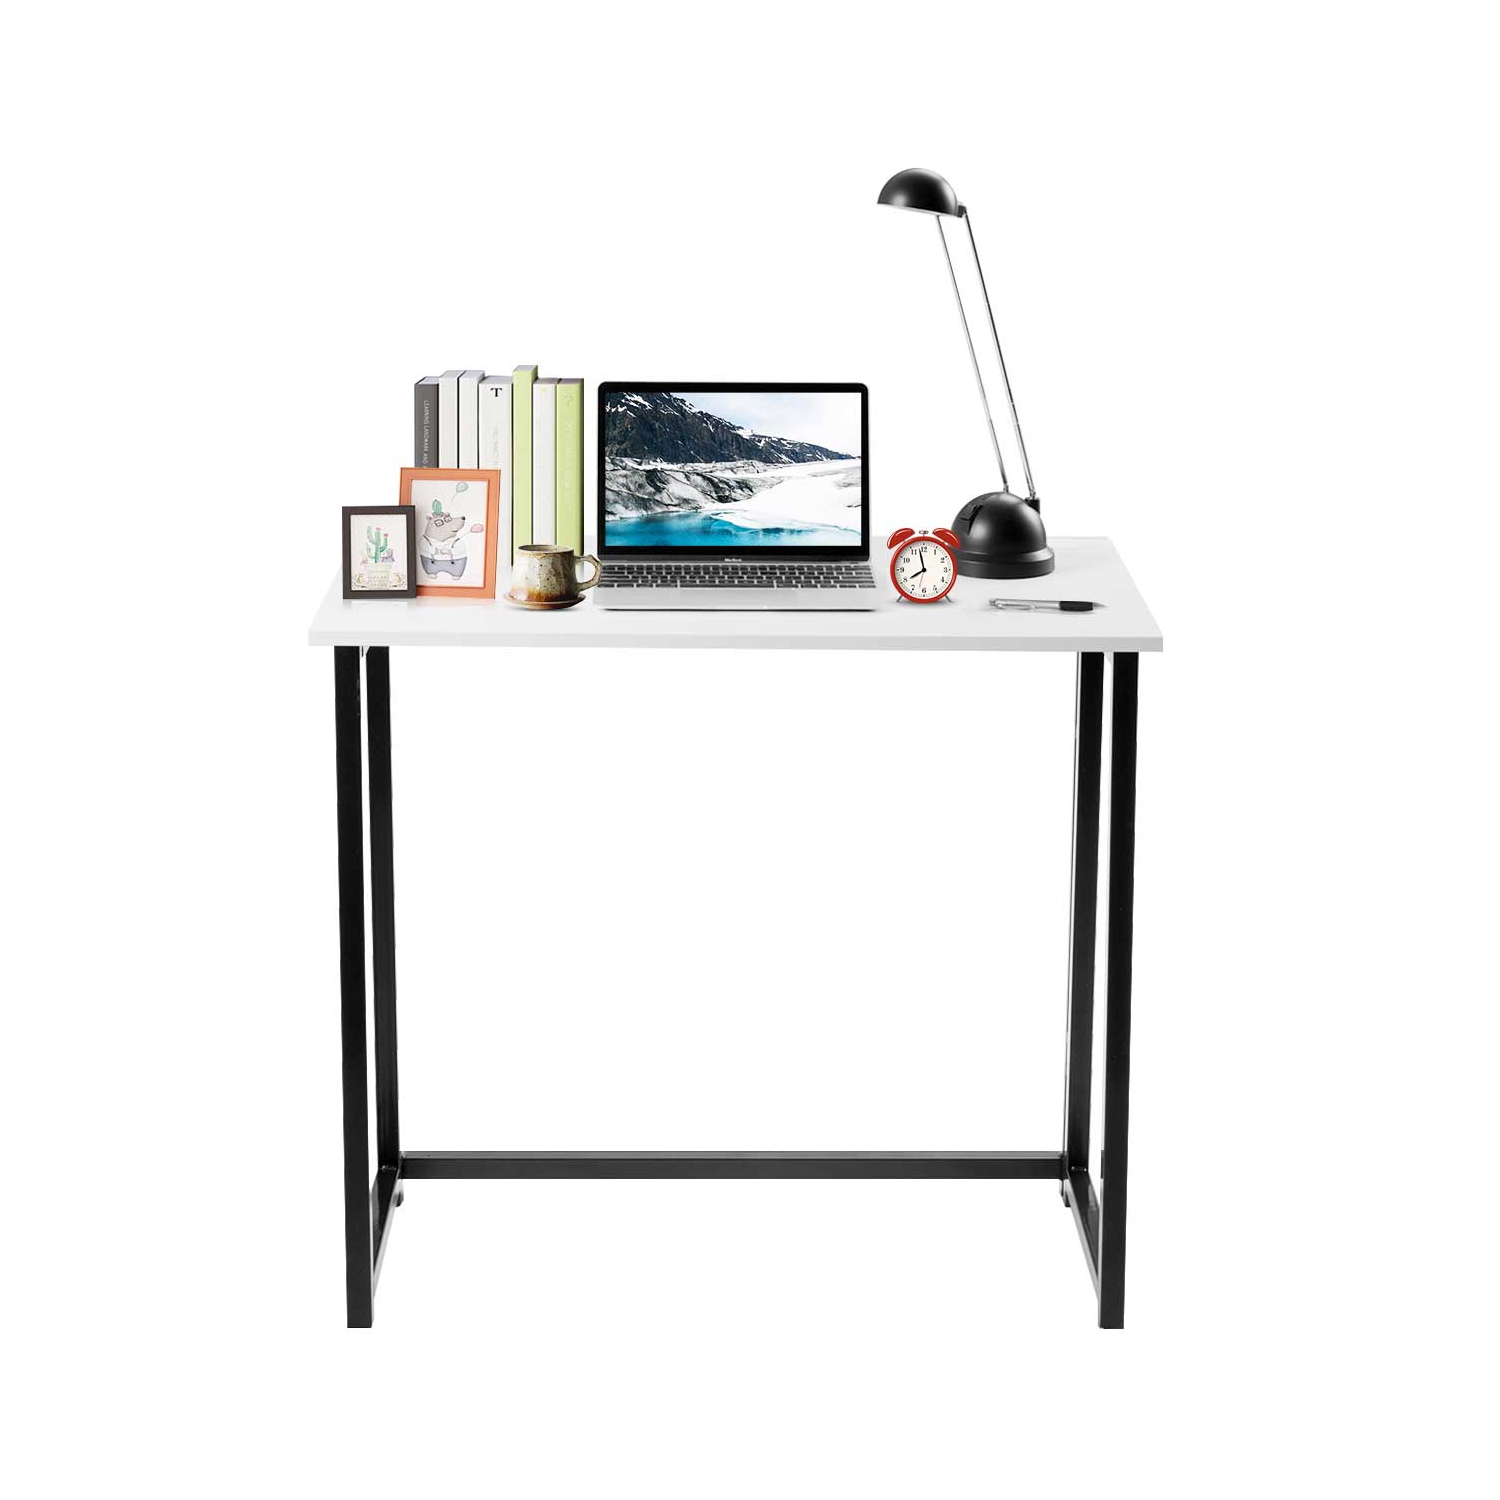 Topbuy Folding Computer Desk Home Office Student Laptop Use Sturdy Writing Table